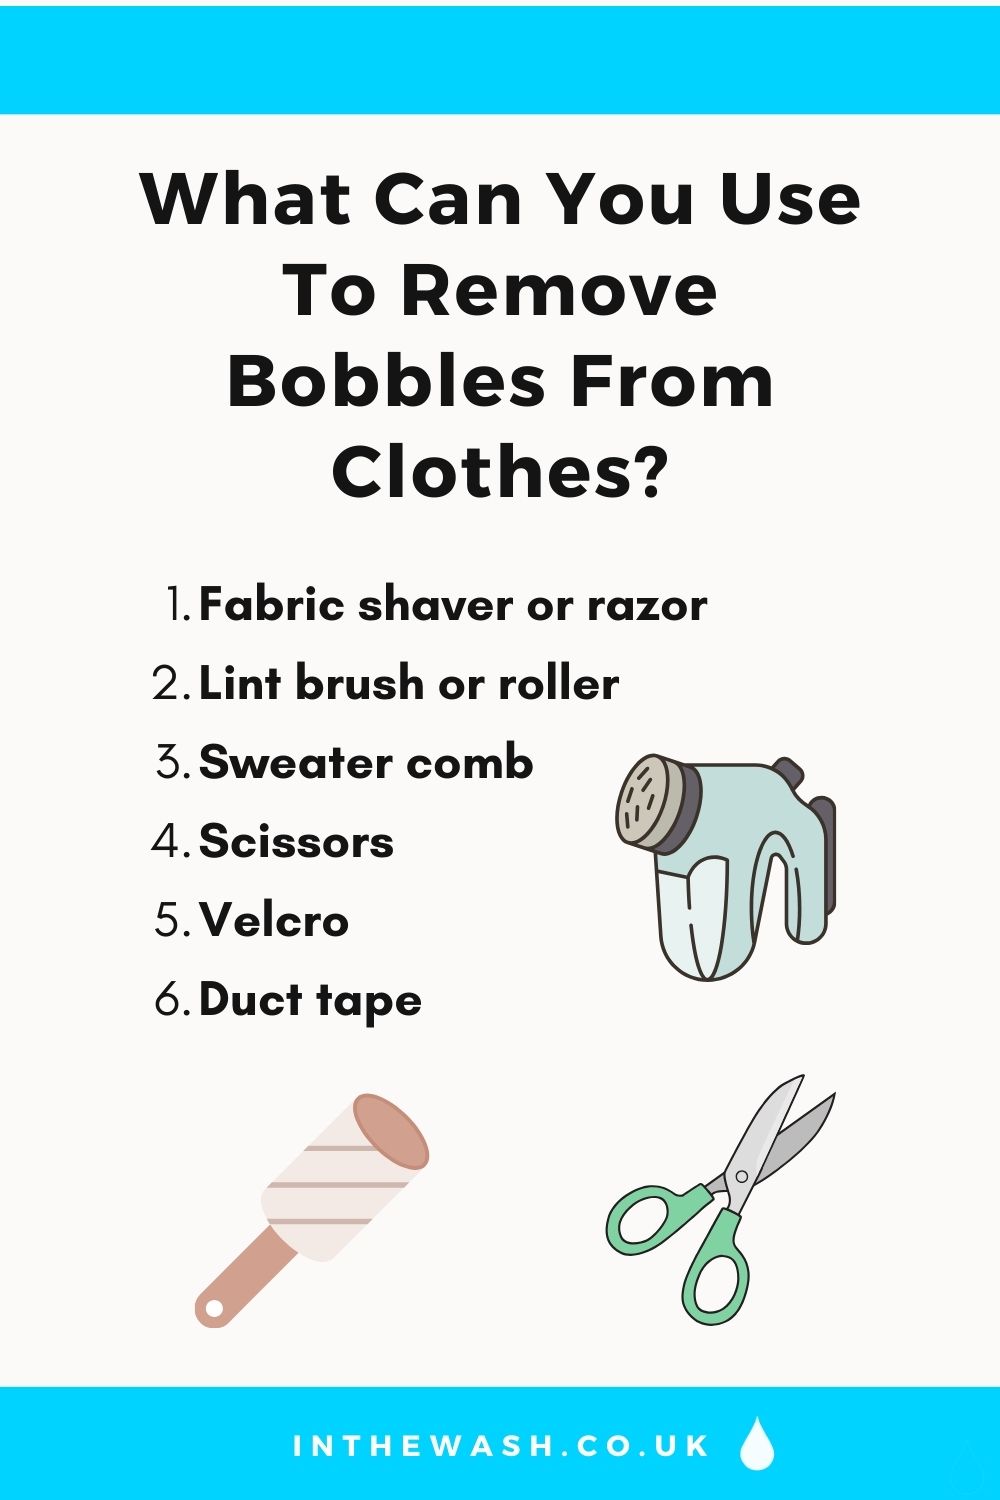 What can you use to remove bobbles from clothes?